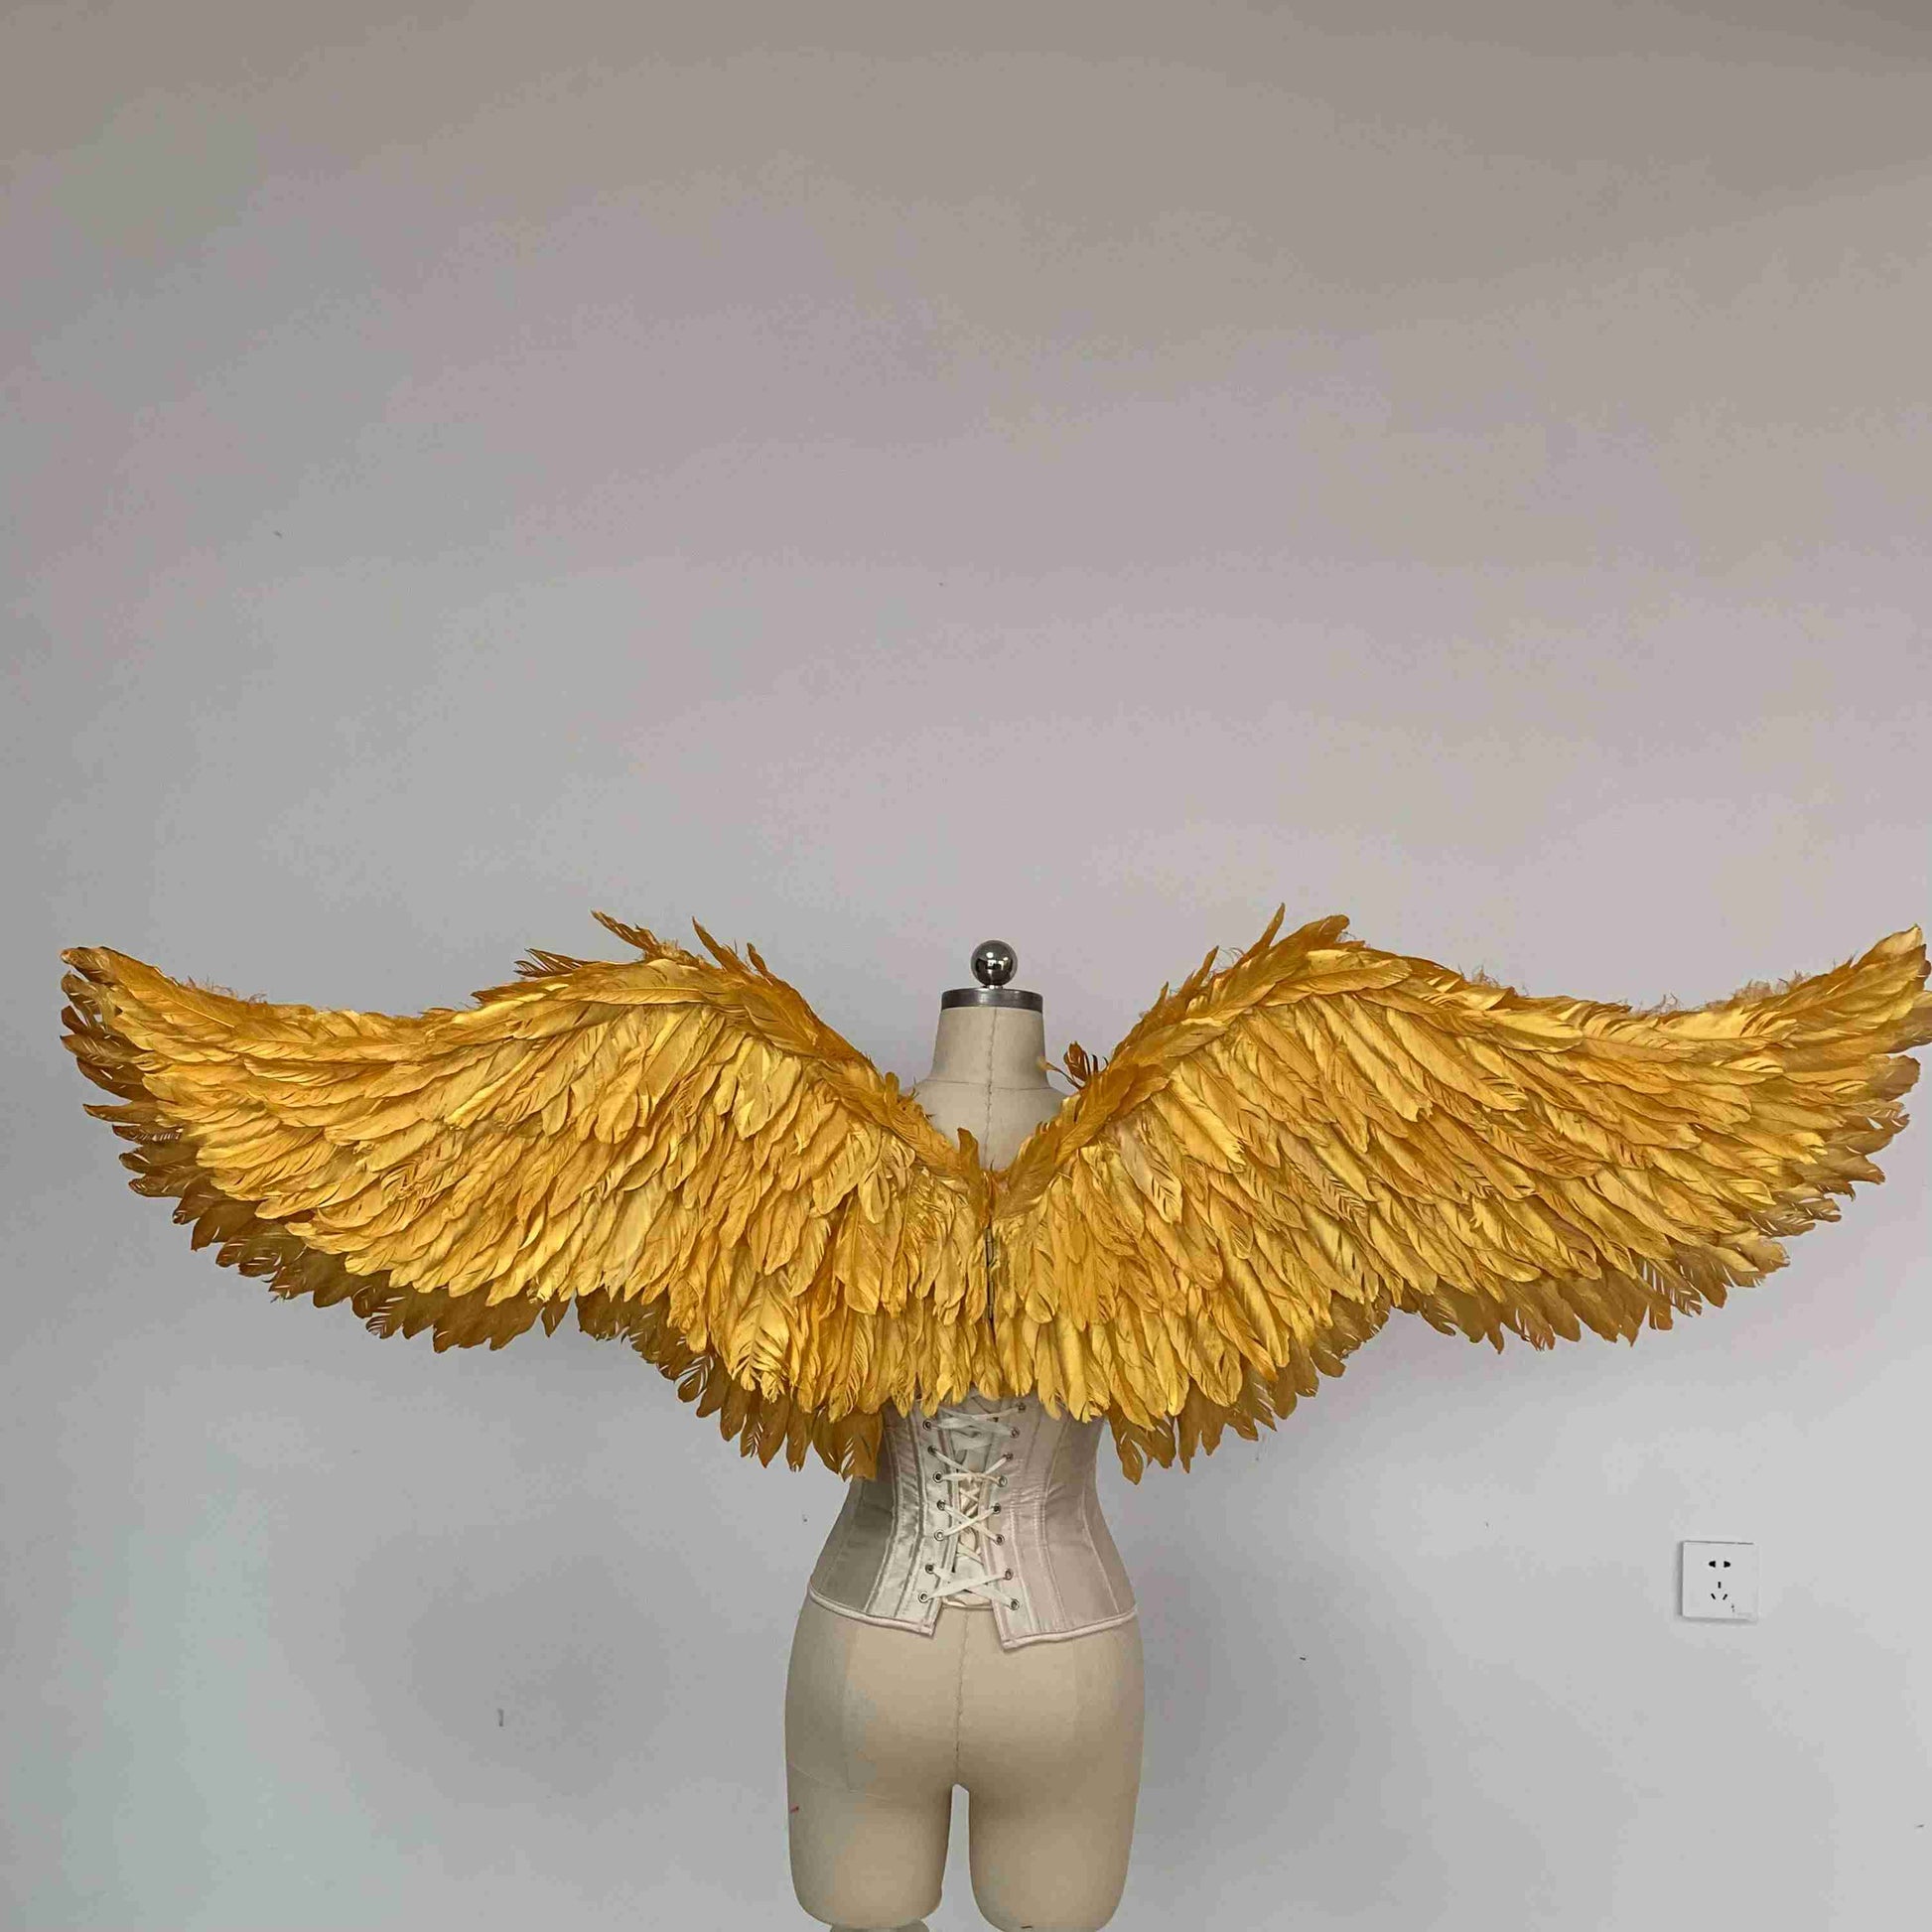 Our small golden angel wings from the back. Made from goose feathers. Wings for angel costume. Suitable for photoshoots.